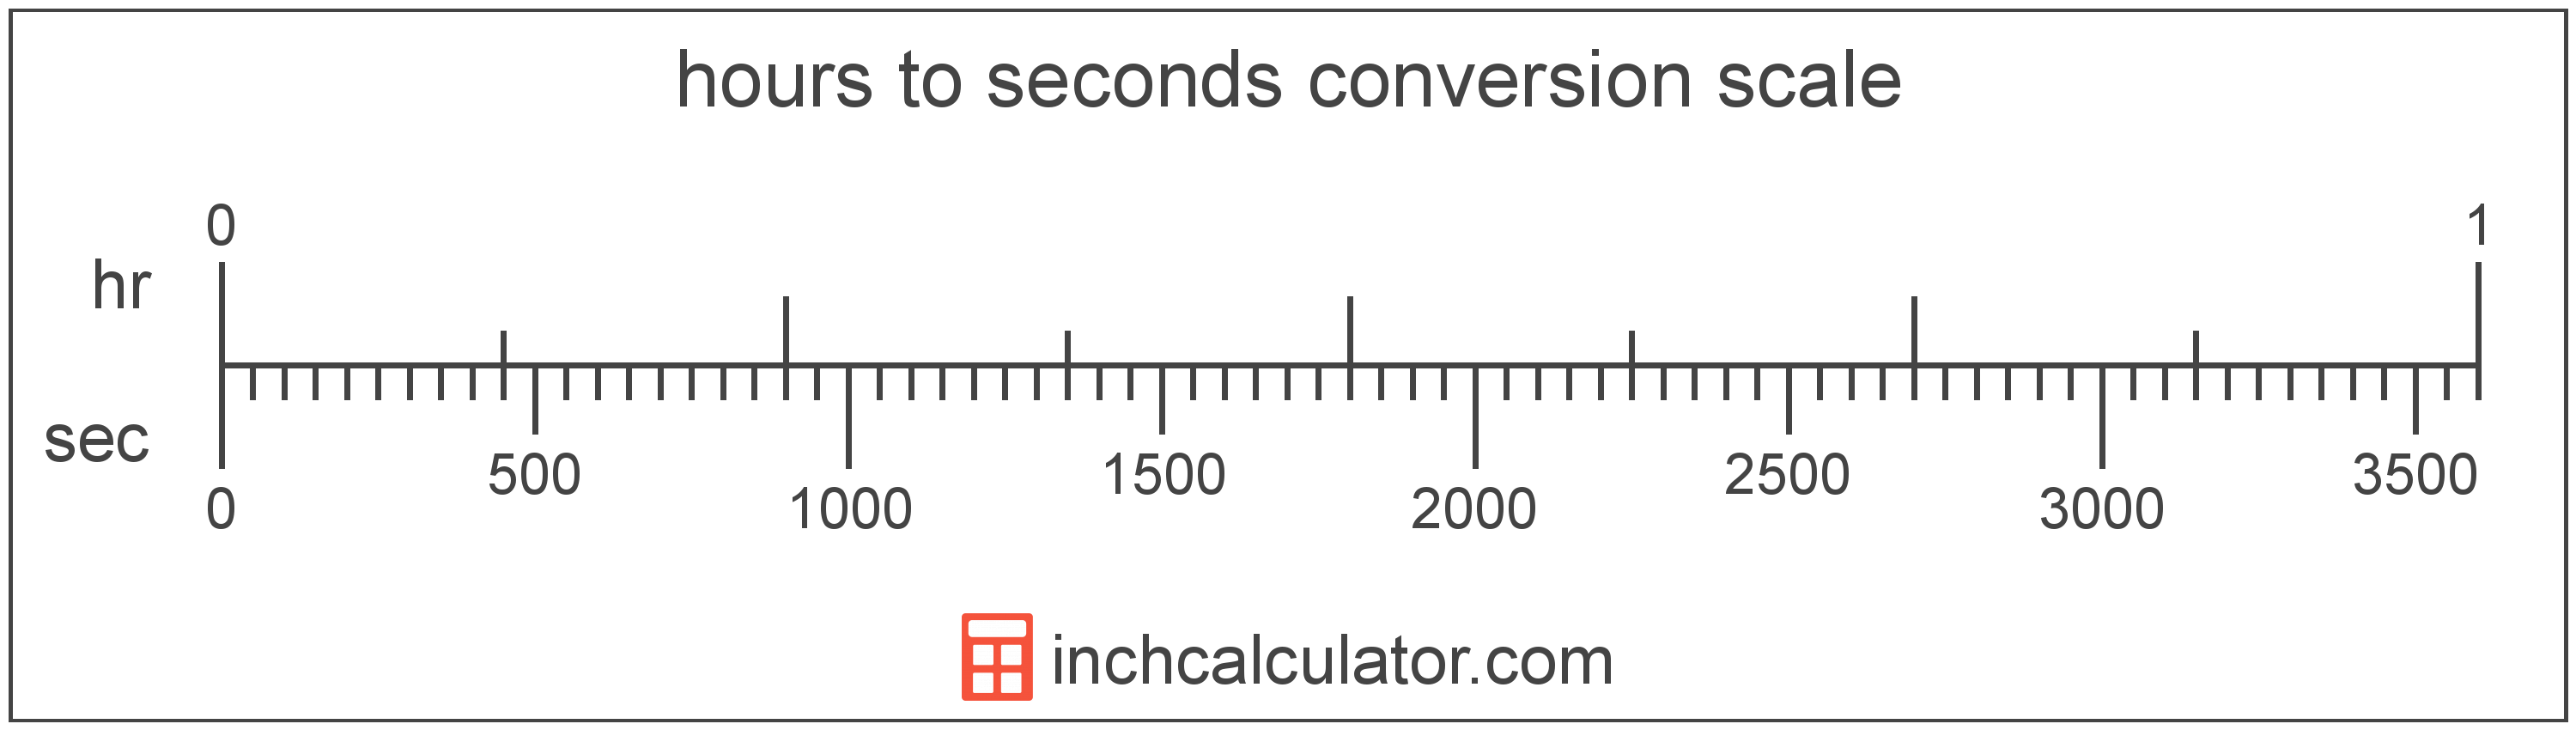 conversion scale showing hours and equivalent seconds time values